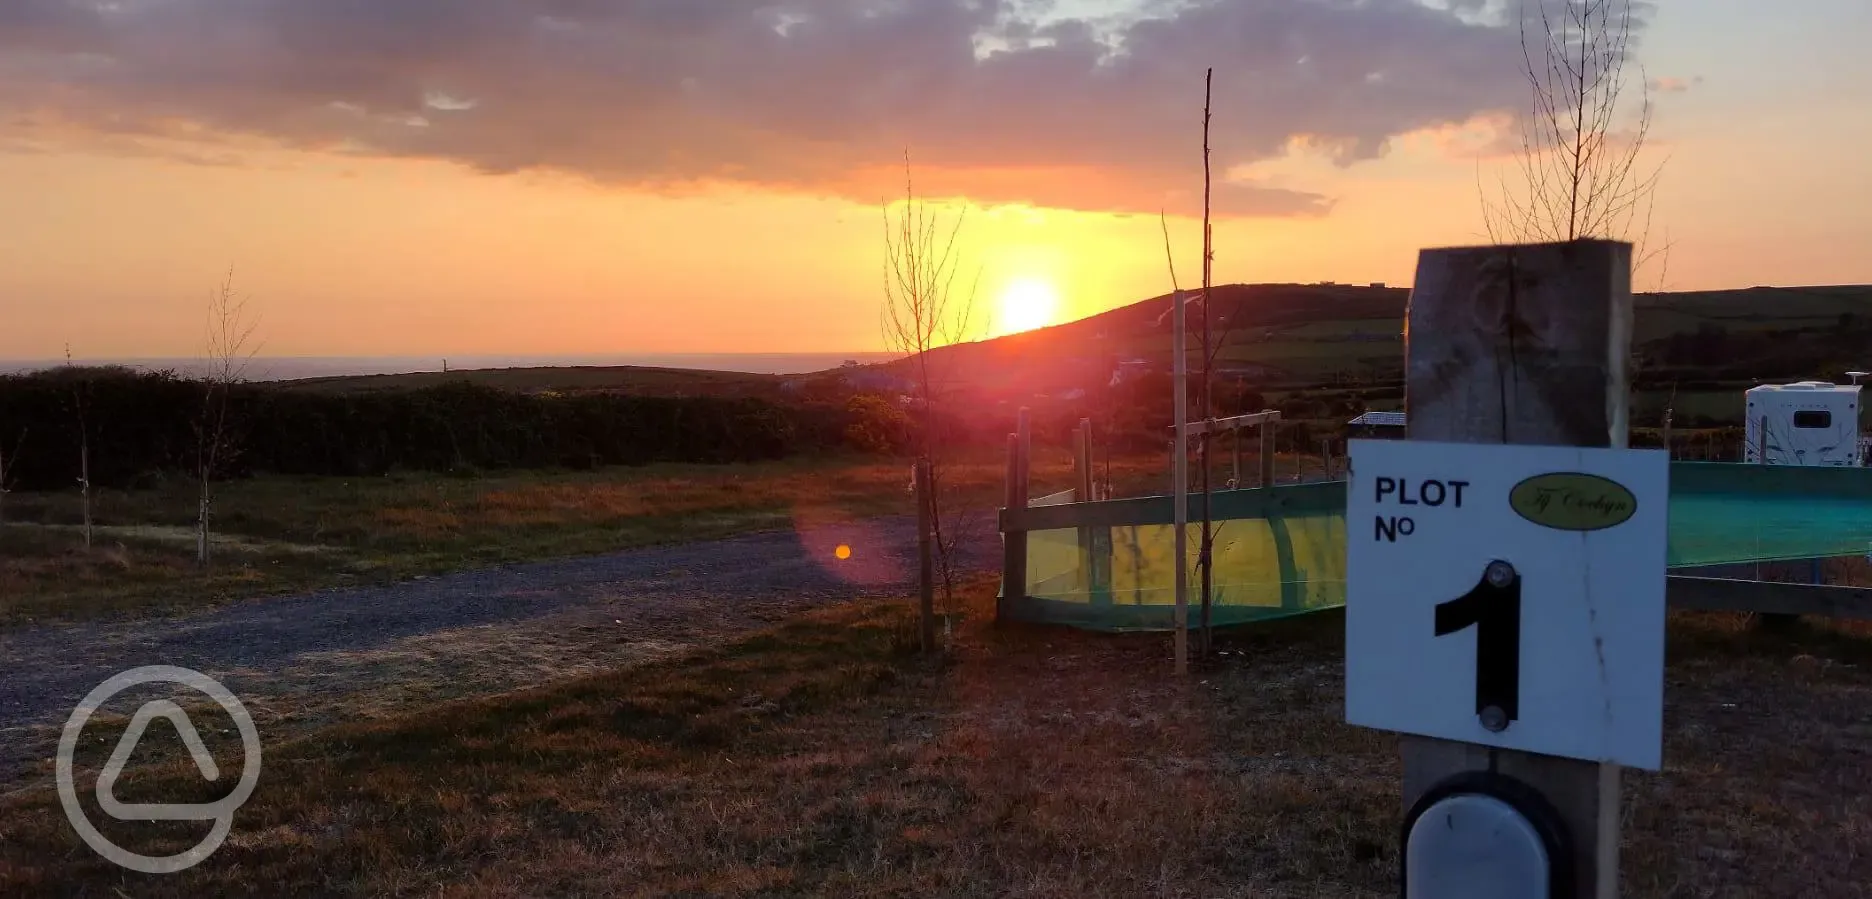 Sunset at the site